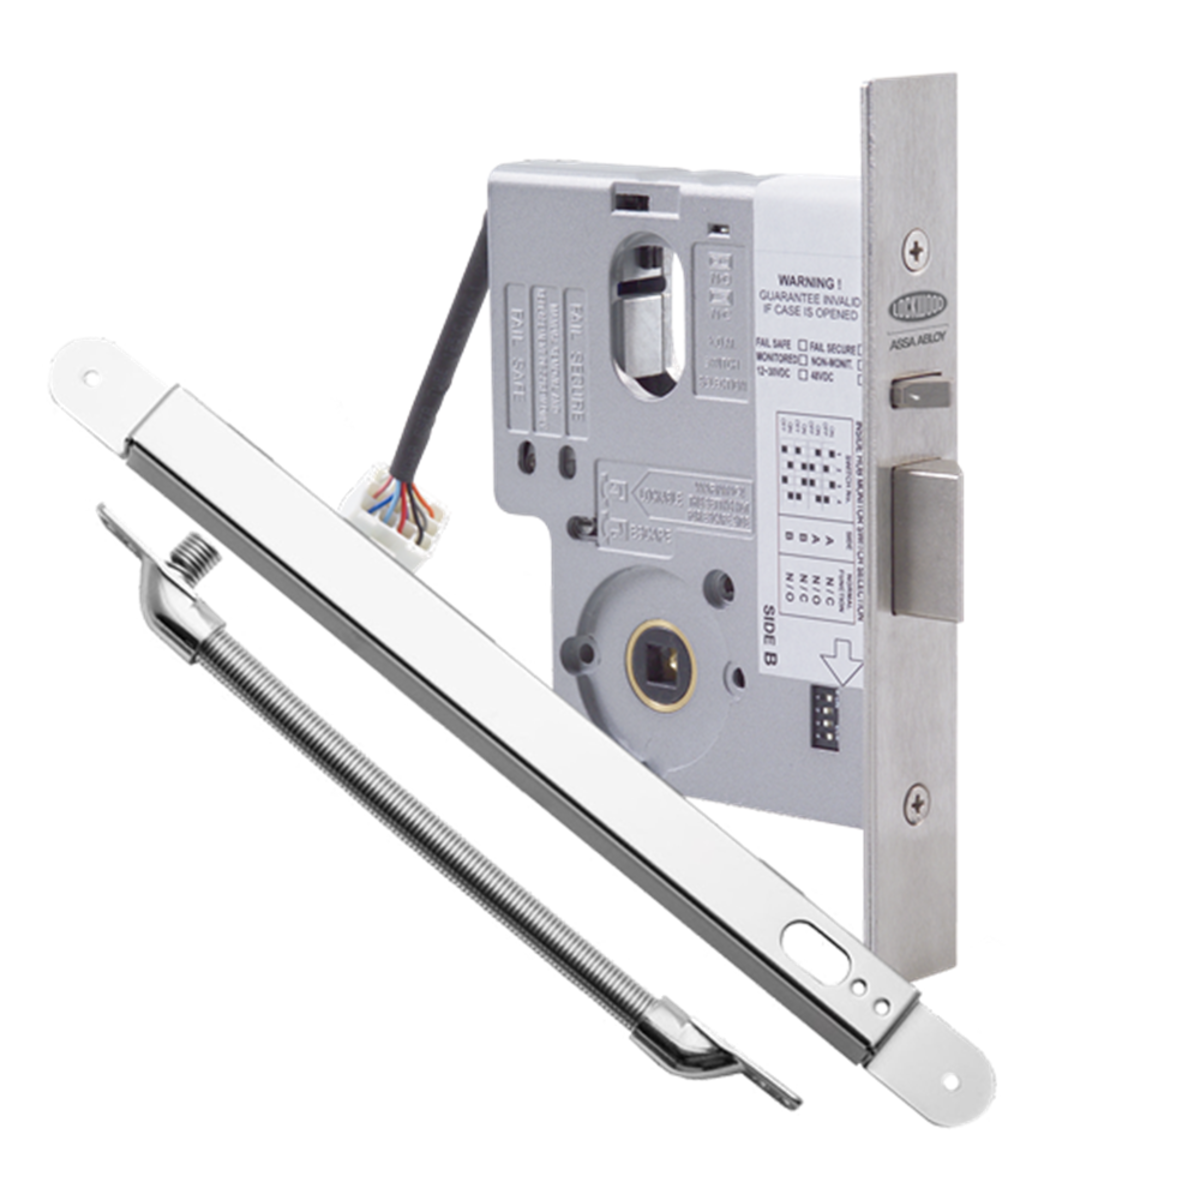 ASSA ABLOY LOCKWOOD 3570 SERIES STANDARD ELECTRIC MORTICE LOCK WITH POWER TRANSFER LEAD COVER MONITORED FAIL SAFE/FAIL SECURE(FIELD CHANGEABLE) 12/24VDC